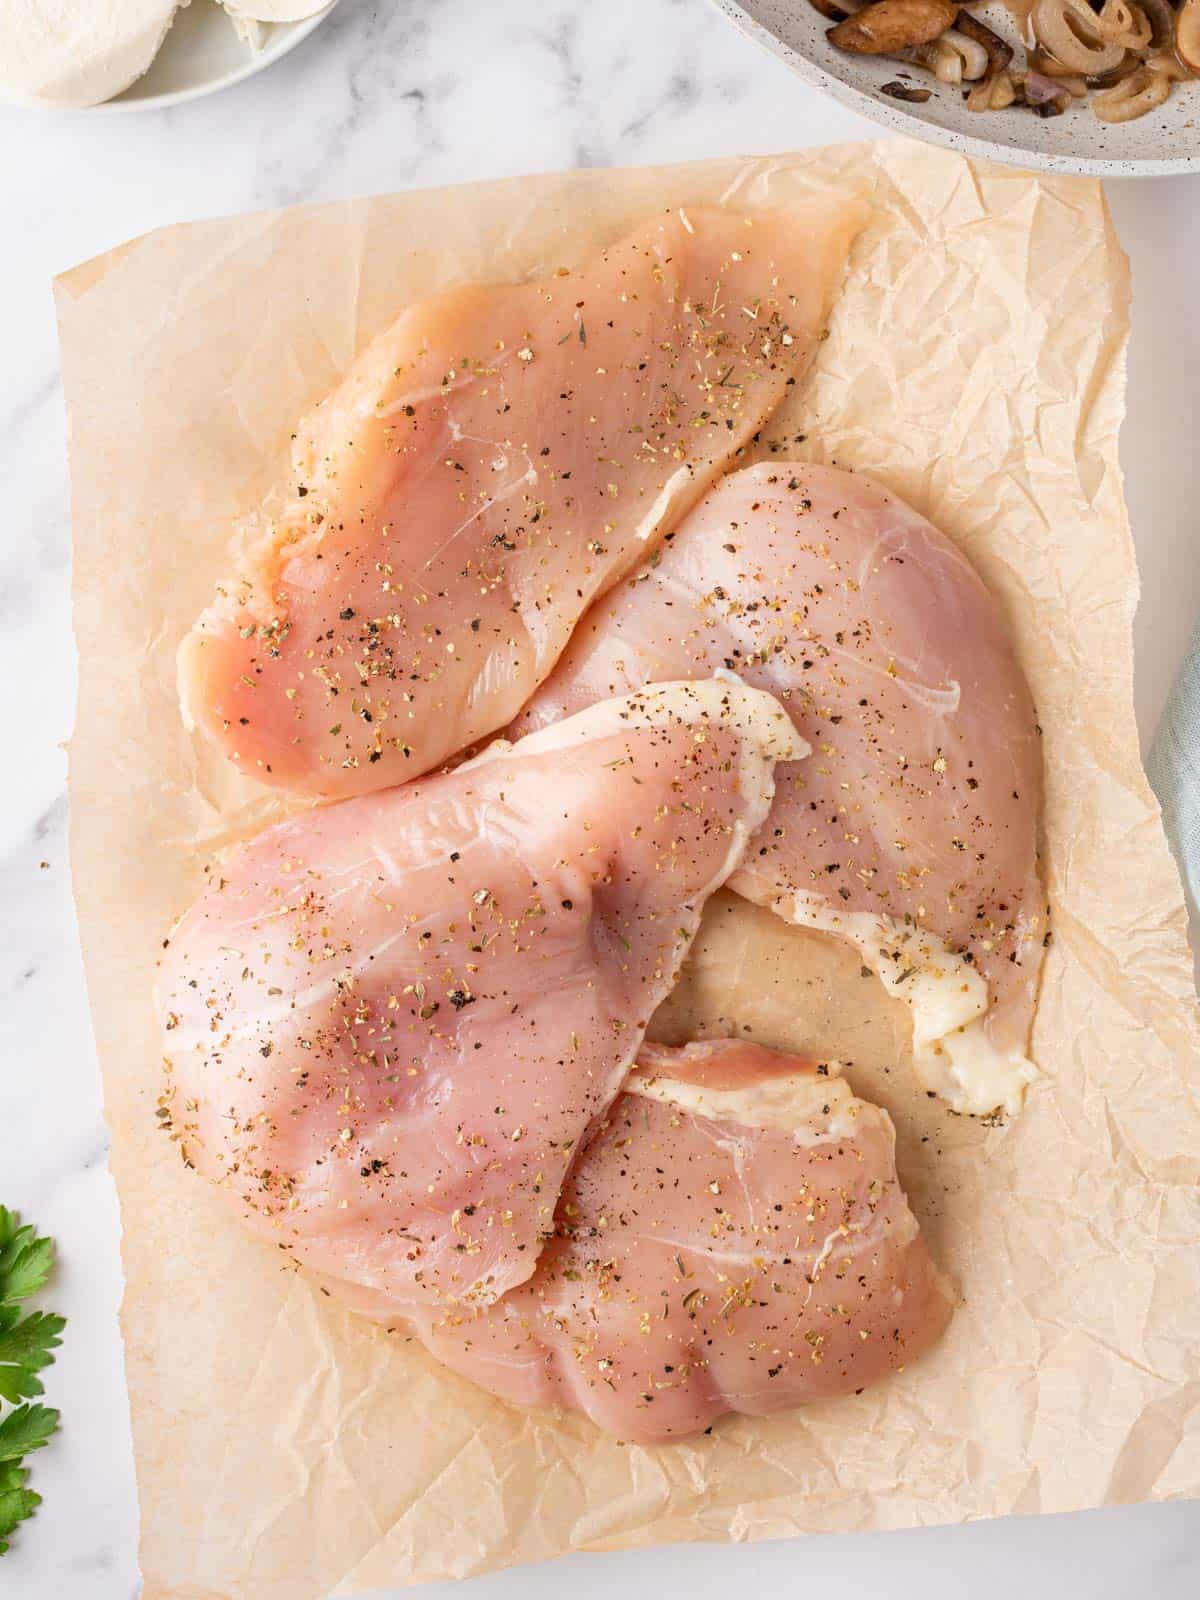 Seasoned chicken breasts on a sheet of parchment paper.